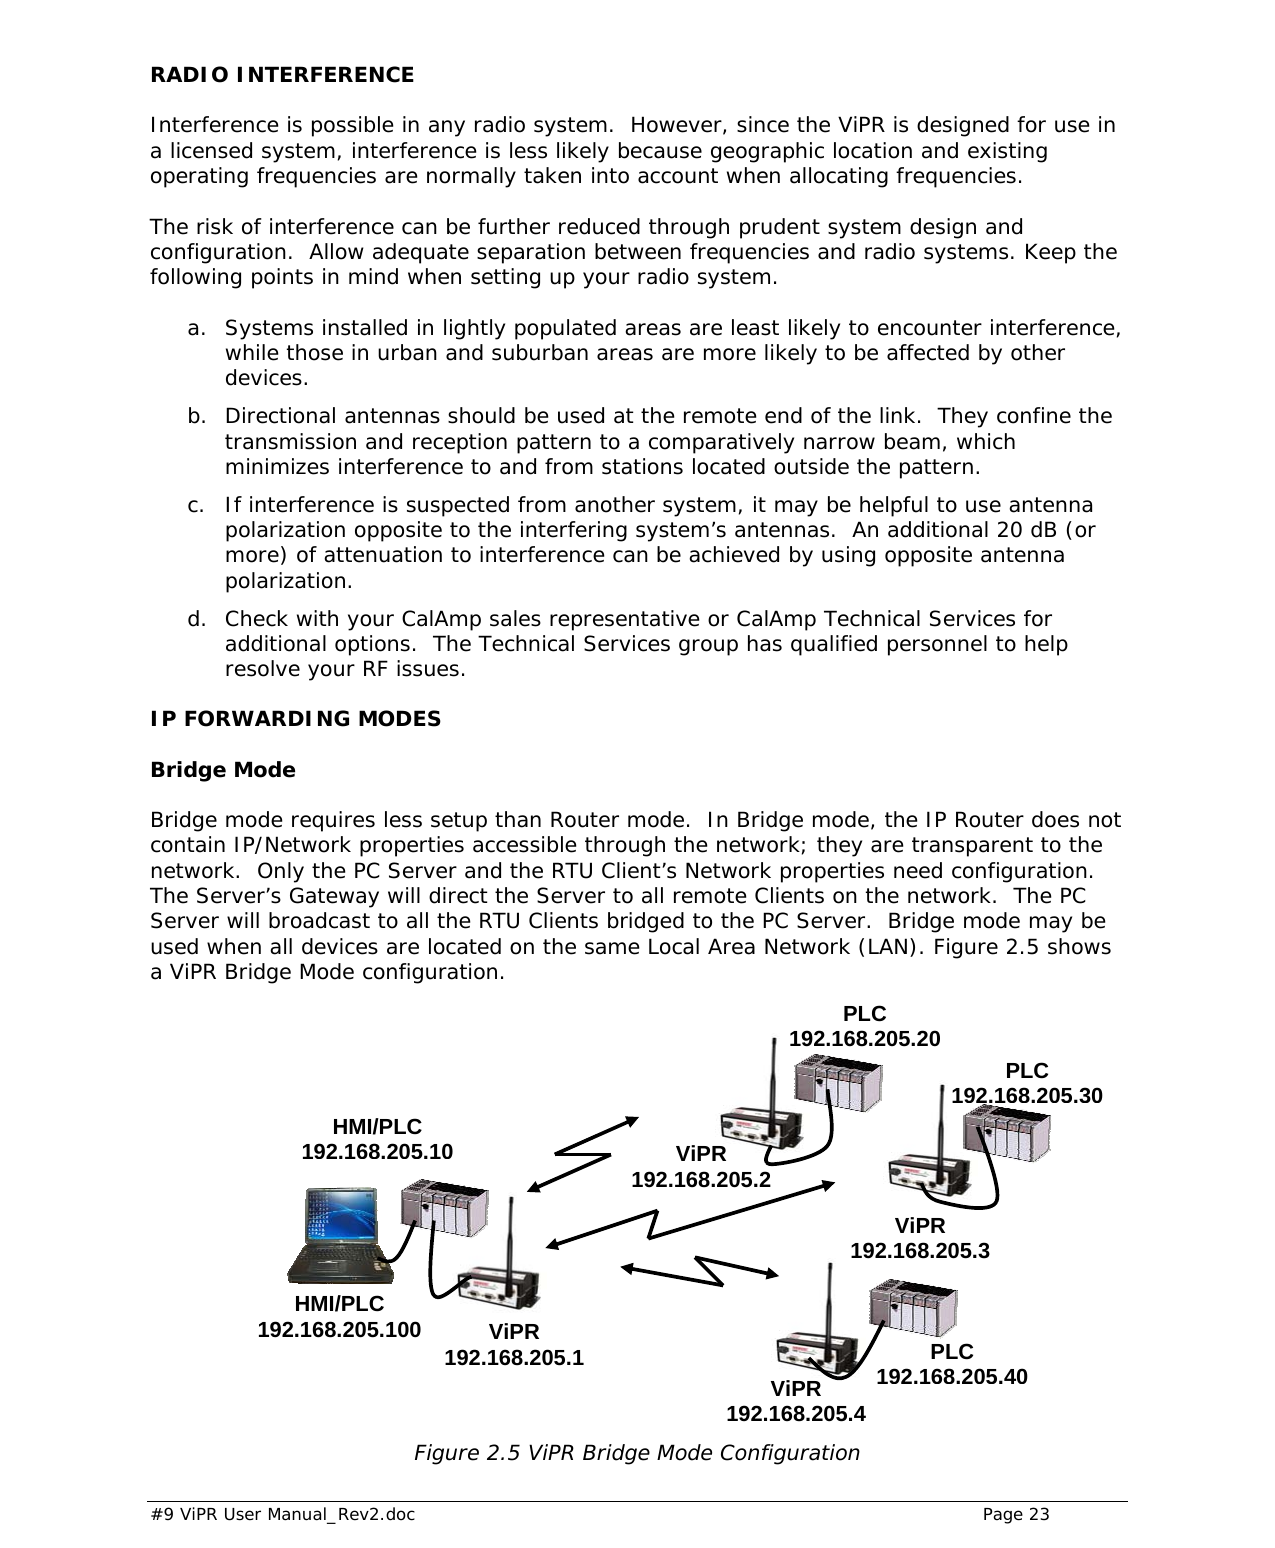  #9 ViPR User Manual_Rev2.doc    Page 23 RADIO INTERFERENCE Interference is possible in any radio system.  However, since the ViPR is designed for use in a licensed system, interference is less likely because geographic location and existing operating frequencies are normally taken into account when allocating frequencies.   The risk of interference can be further reduced through prudent system design and configuration.  Allow adequate separation between frequencies and radio systems. Keep the following points in mind when setting up your radio system.   a. Systems installed in lightly populated areas are least likely to encounter interference, while those in urban and suburban areas are more likely to be affected by other devices.  b. Directional antennas should be used at the remote end of the link.  They confine the transmission and reception pattern to a comparatively narrow beam, which minimizes interference to and from stations located outside the pattern.  c. If interference is suspected from another system, it may be helpful to use antenna polarization opposite to the interfering system’s antennas.  An additional 20 dB (or more) of attenuation to interference can be achieved by using opposite antenna polarization.  d. Check with your CalAmp sales representative or CalAmp Technical Services for additional options.  The Technical Services group has qualified personnel to help resolve your RF issues.  IP FORWARDING MODES Bridge Mode Bridge mode requires less setup than Router mode.  In Bridge mode, the IP Router does not contain IP/Network properties accessible through the network; they are transparent to the network.  Only the PC Server and the RTU Client’s Network properties need configuration.  The Server’s Gateway will direct the Server to all remote Clients on the network.  The PC Server will broadcast to all the RTU Clients bridged to the PC Server.  Bridge mode may be used when all devices are located on the same Local Area Network (LAN). Figure 2.5 shows a ViPR Bridge Mode configuration.                   Figure 2.5 ViPR Bridge Mode Configuration  ViPR 192.168.205.1ViPR 192.168.205.3 PLC 192.168.205.40HMI/PLC 192.168.205.10HMI/PLC 192.168.205.100 PLC 192.168.205.30PLC 192.168.205.20ViPR 192.168.205.2ViPR 192.168.205.4 